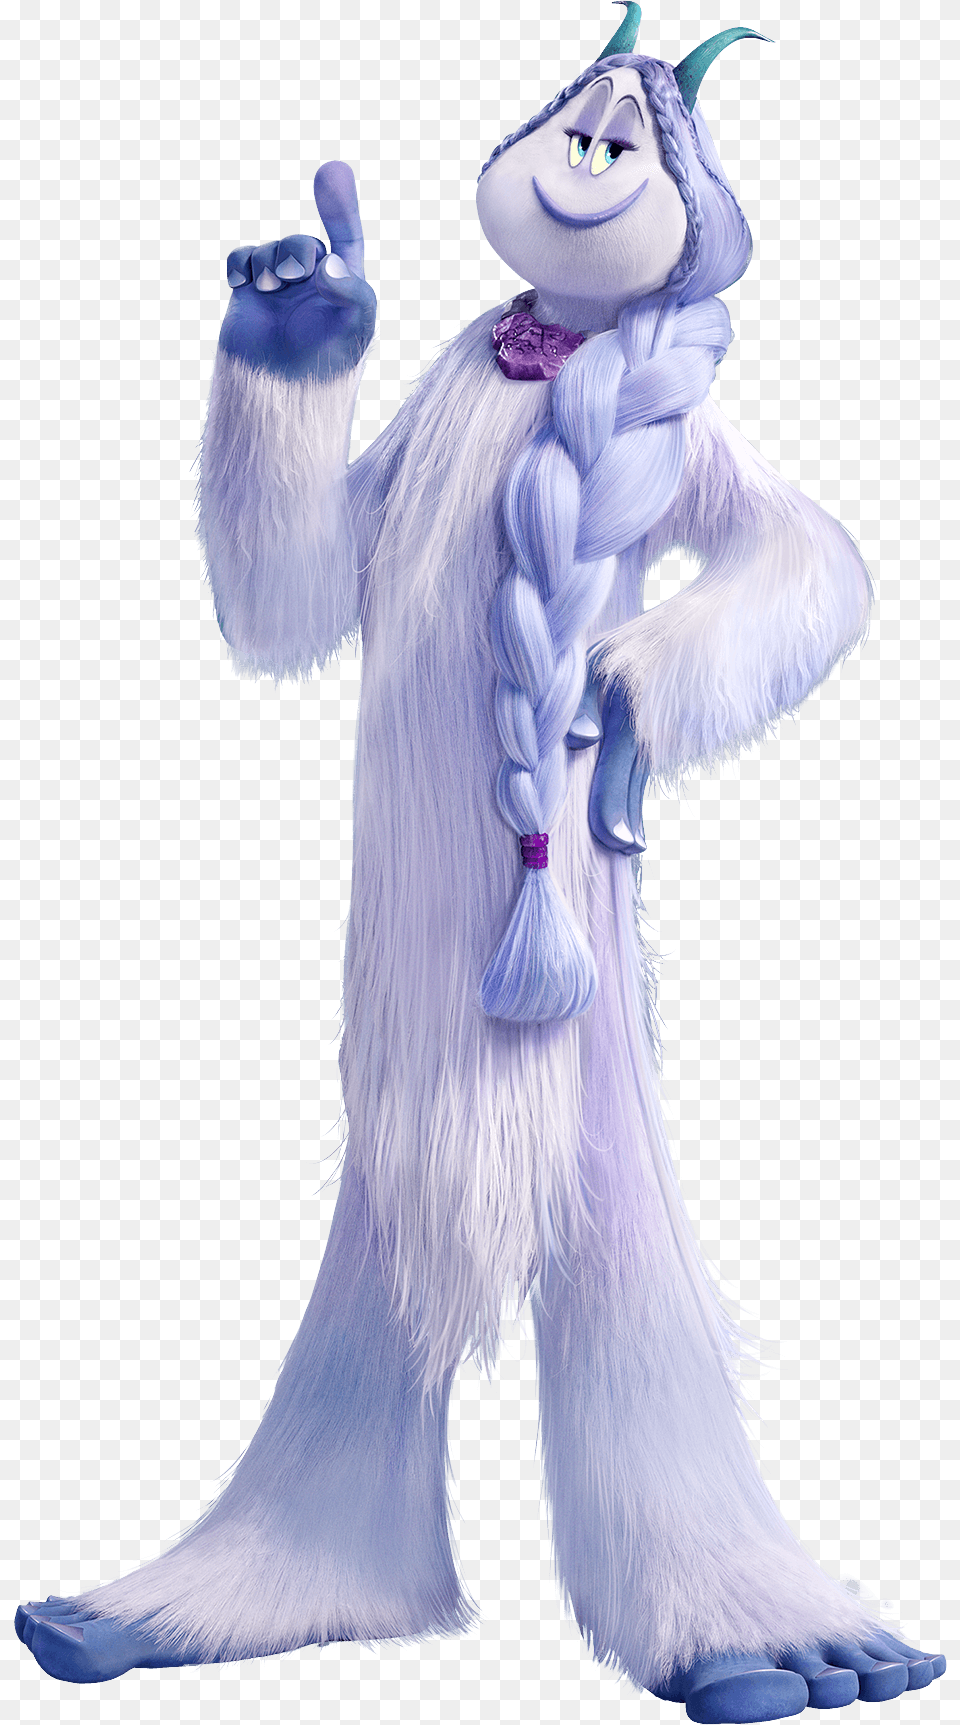 Smallfoot Meechee Yeti Holding Finger Up, Adult, Cartoon, Female, Person Png Image